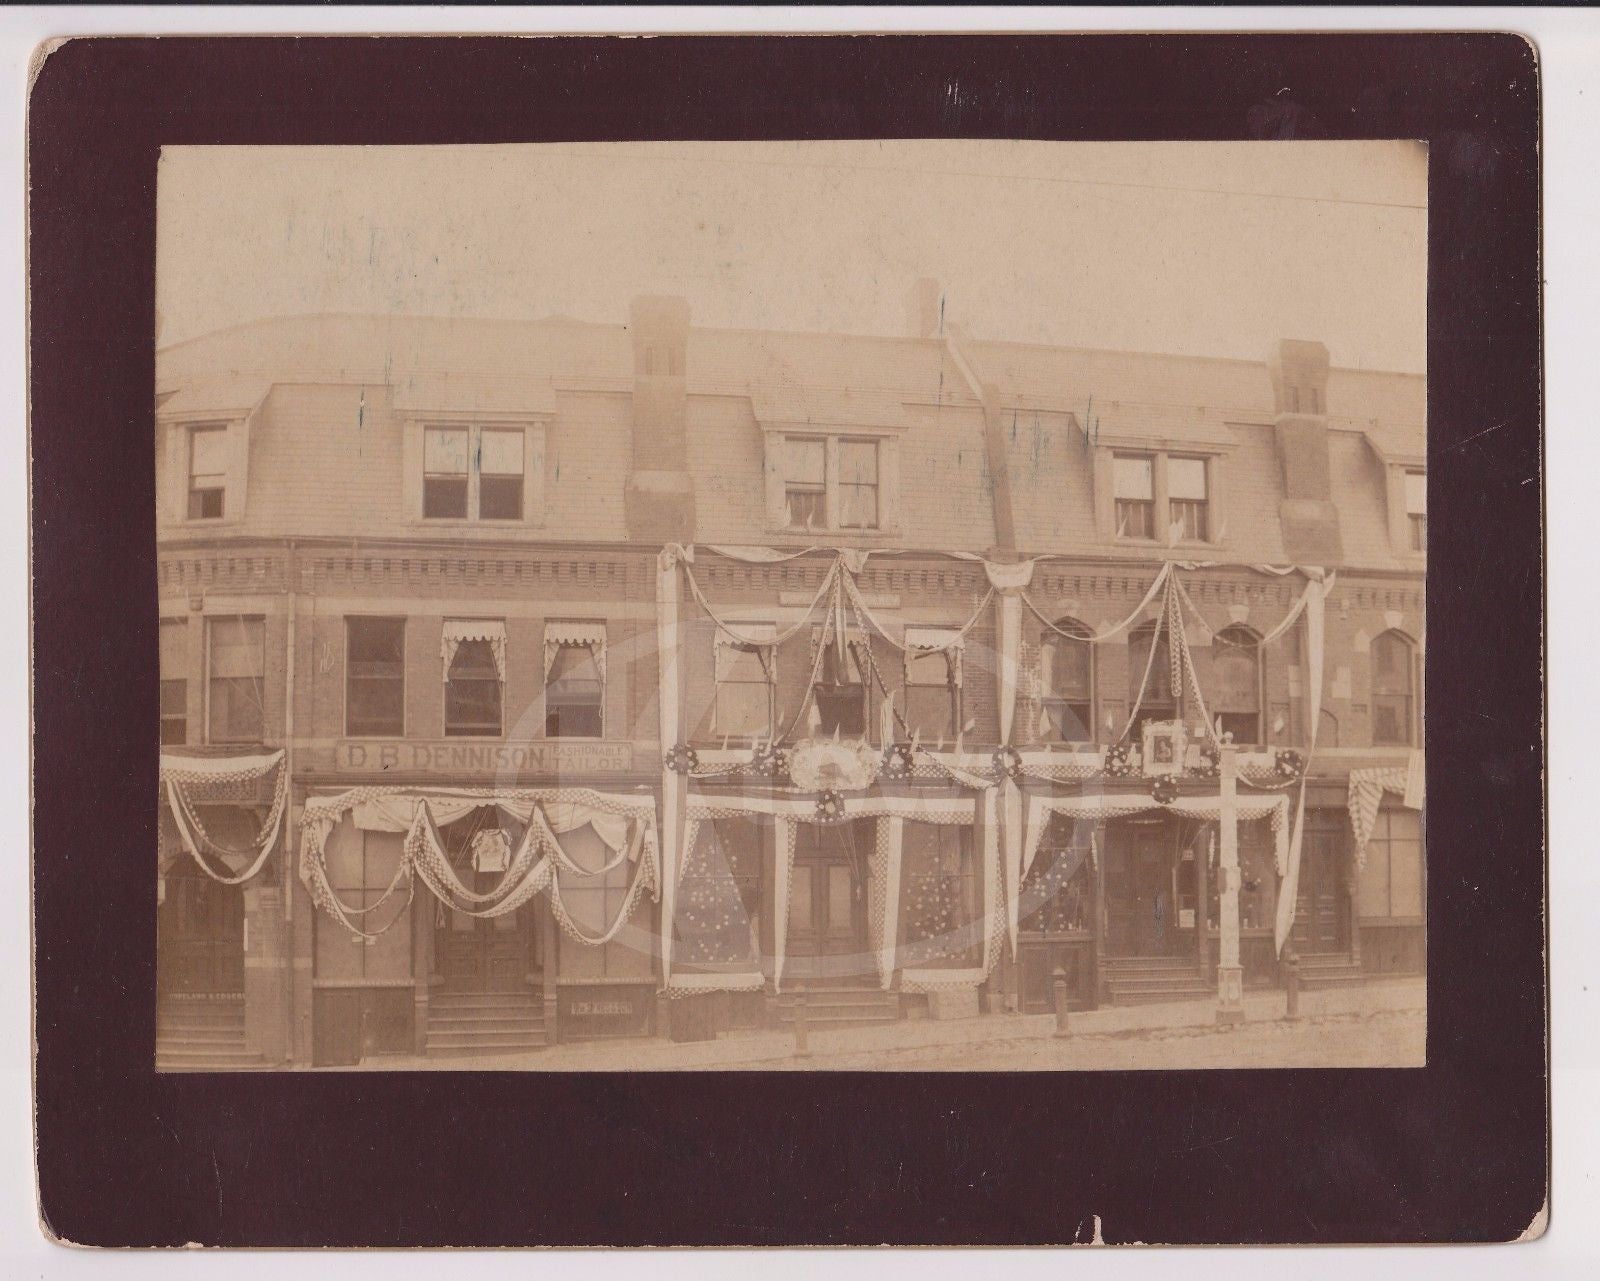 PRESIDENT GROVER CLEVELAND INAUGURATION PARADE DECORATIONS ANTIQUE PHOTOGRAPH - K-townConsignments